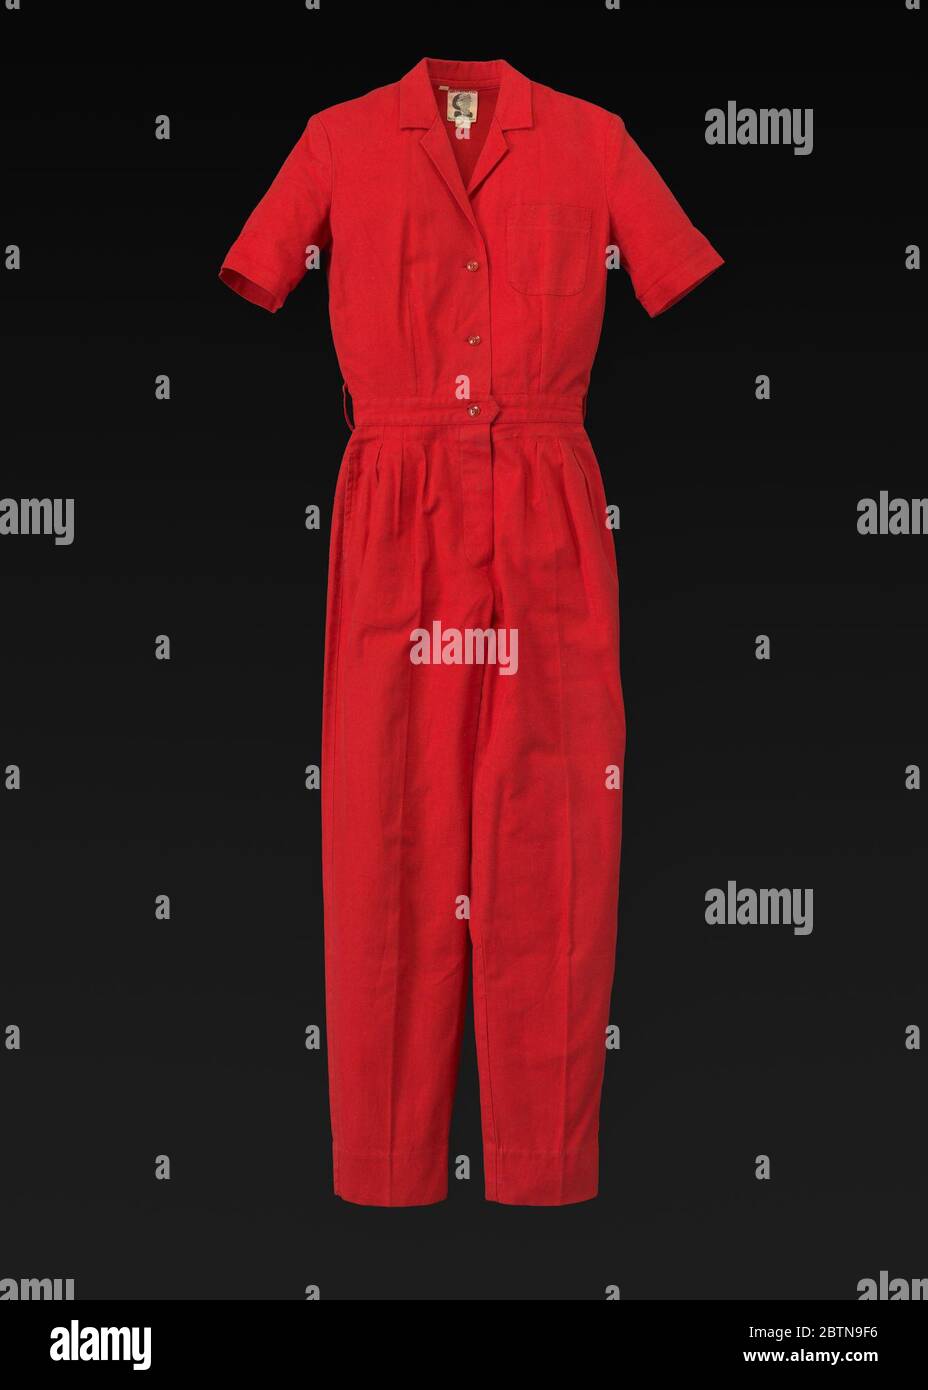 Red jumpsuit designed by Willi Smith. Red jumpsuit designed by Willi Smith for WilliWear Limited.The jumpsuit has a v-neck, a notched lapel collar, and short cuffed sleeves and is made of a red cotton fabric. There is a breast pocket on the proper left side with rounded bottom corners. Stock Photo